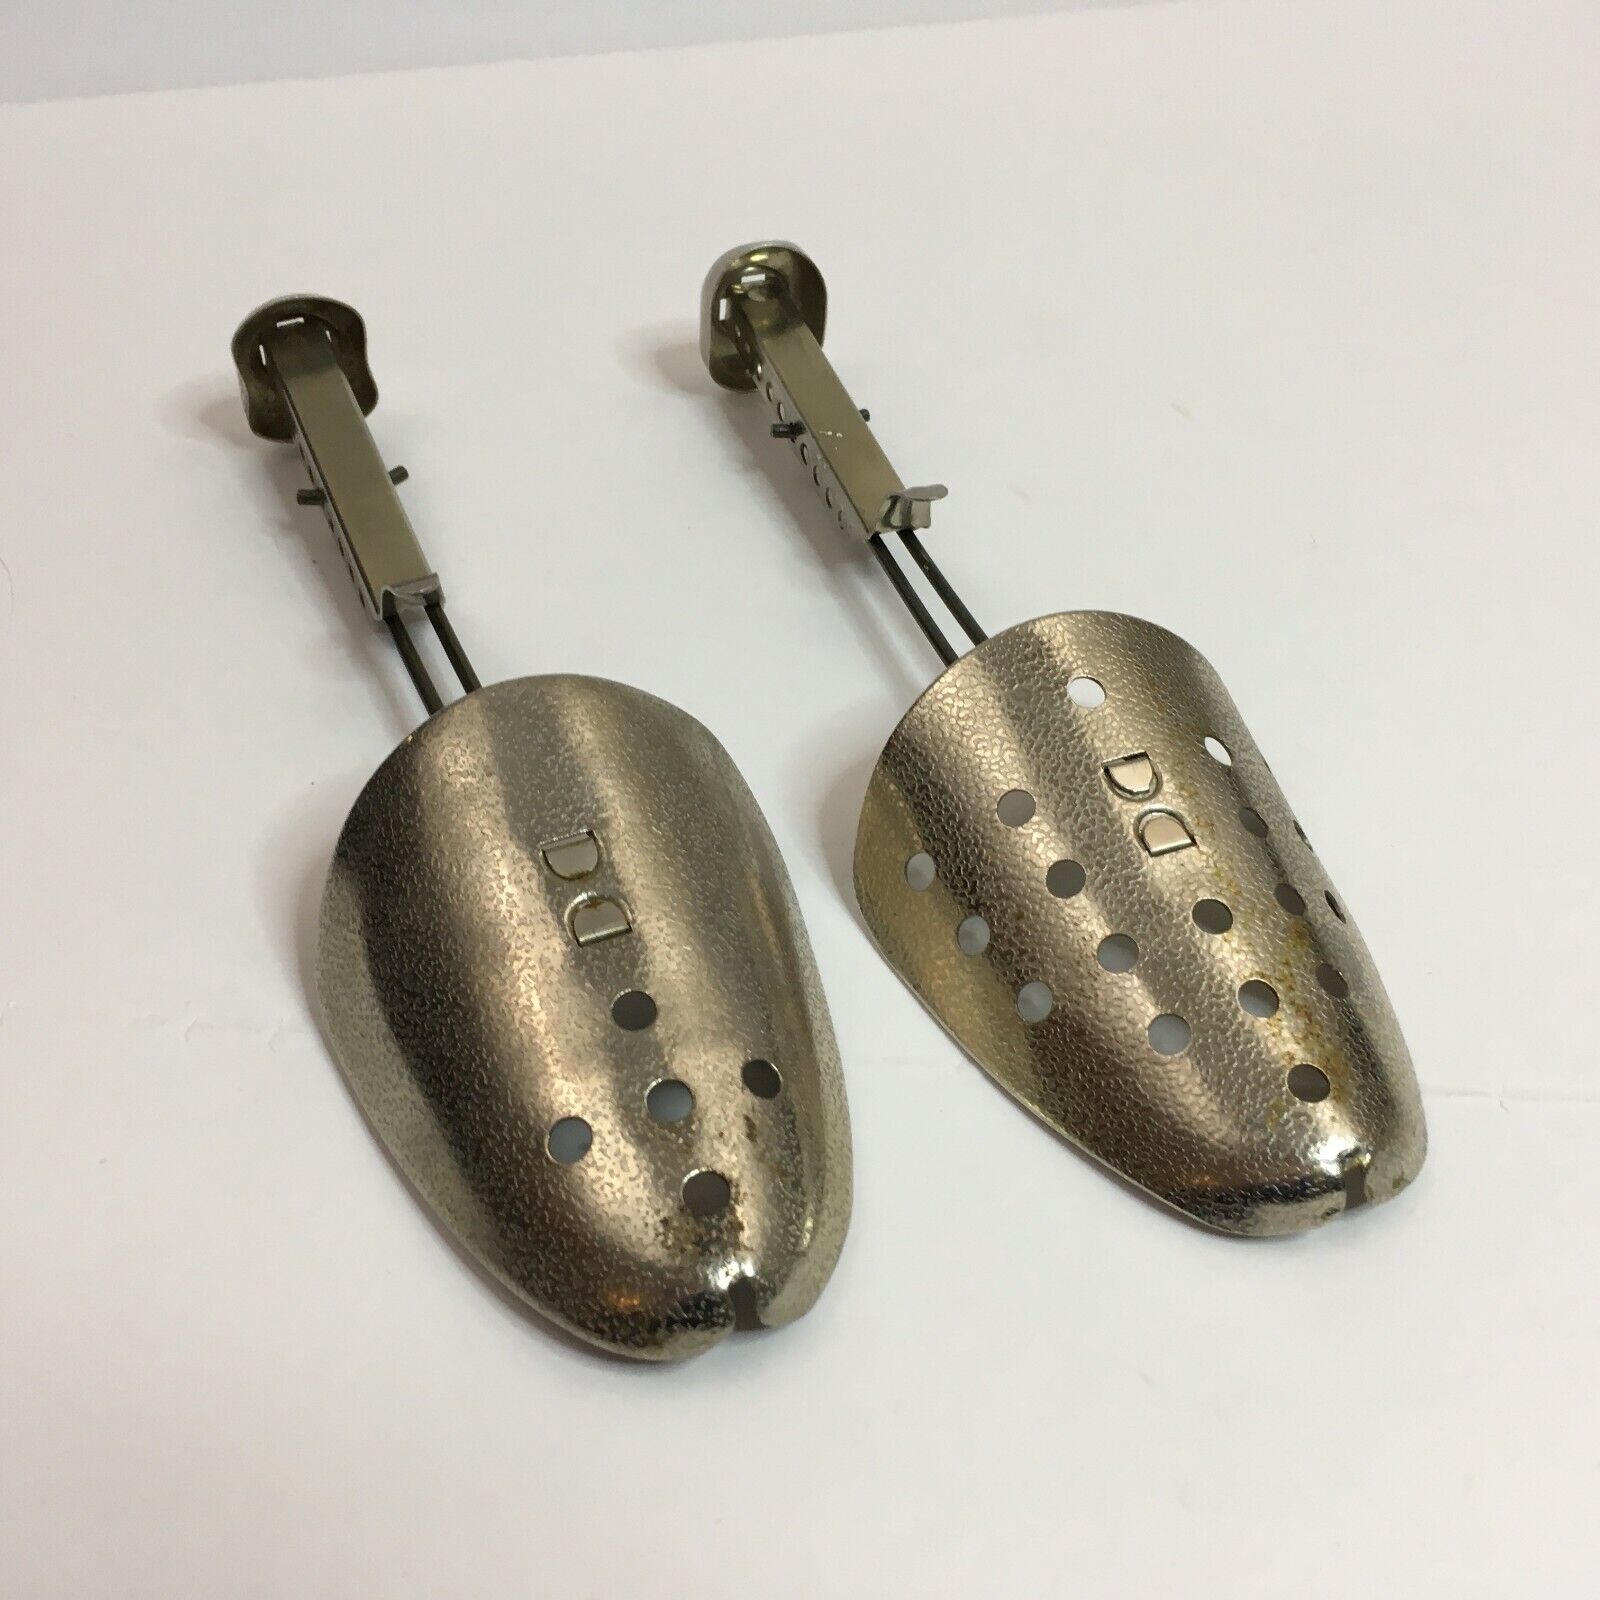 Exco USA Metal Shoe Trees Forms Pair Adjustable 